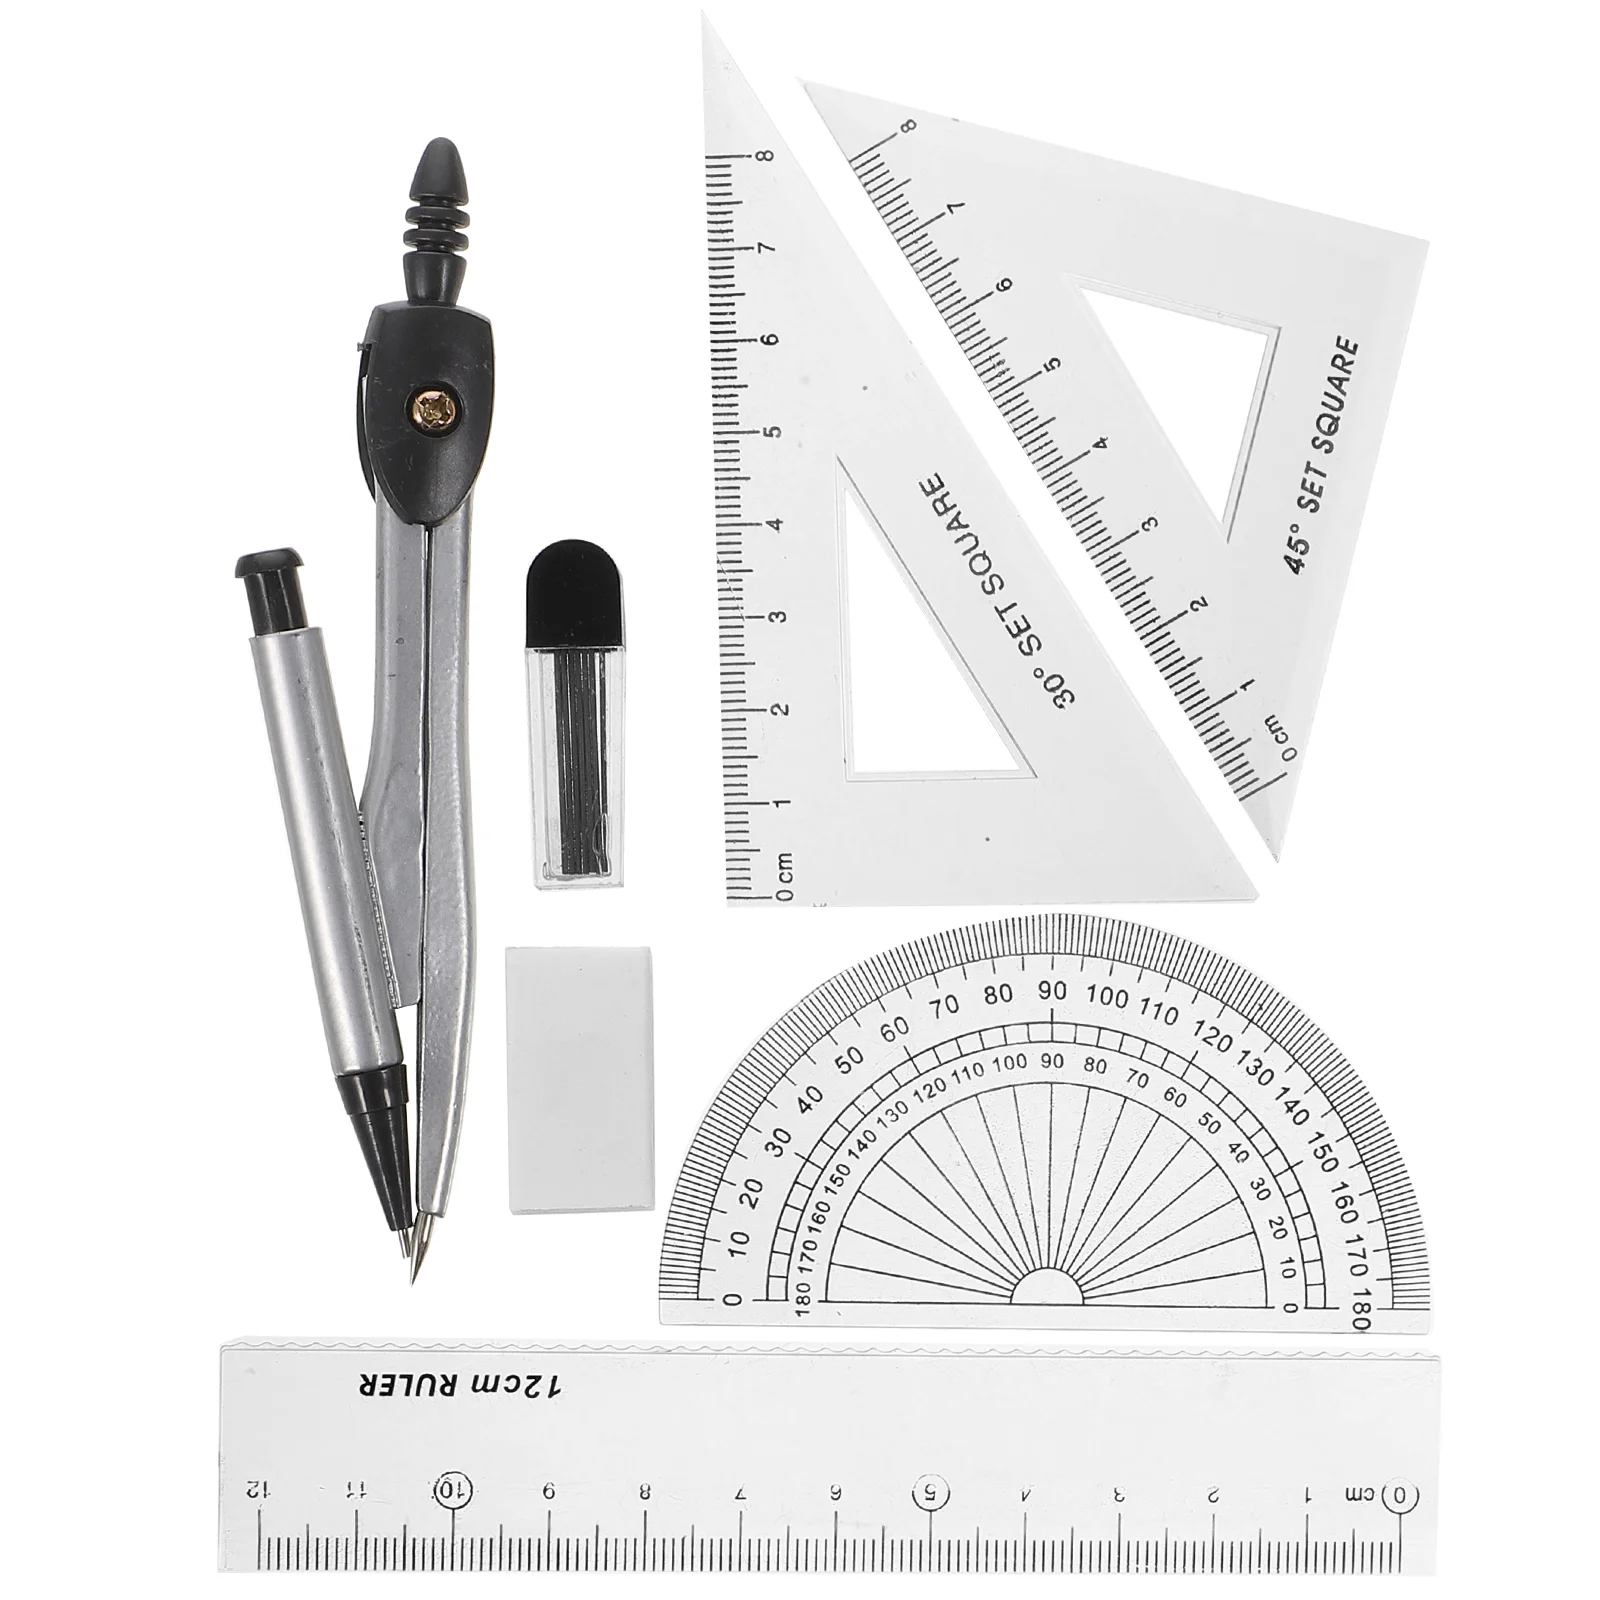 Math Geometry Set Student Supplies with Storage Box, Includes Compasses, Rulers, Protractor, Eraser, Refills, for Drafting and